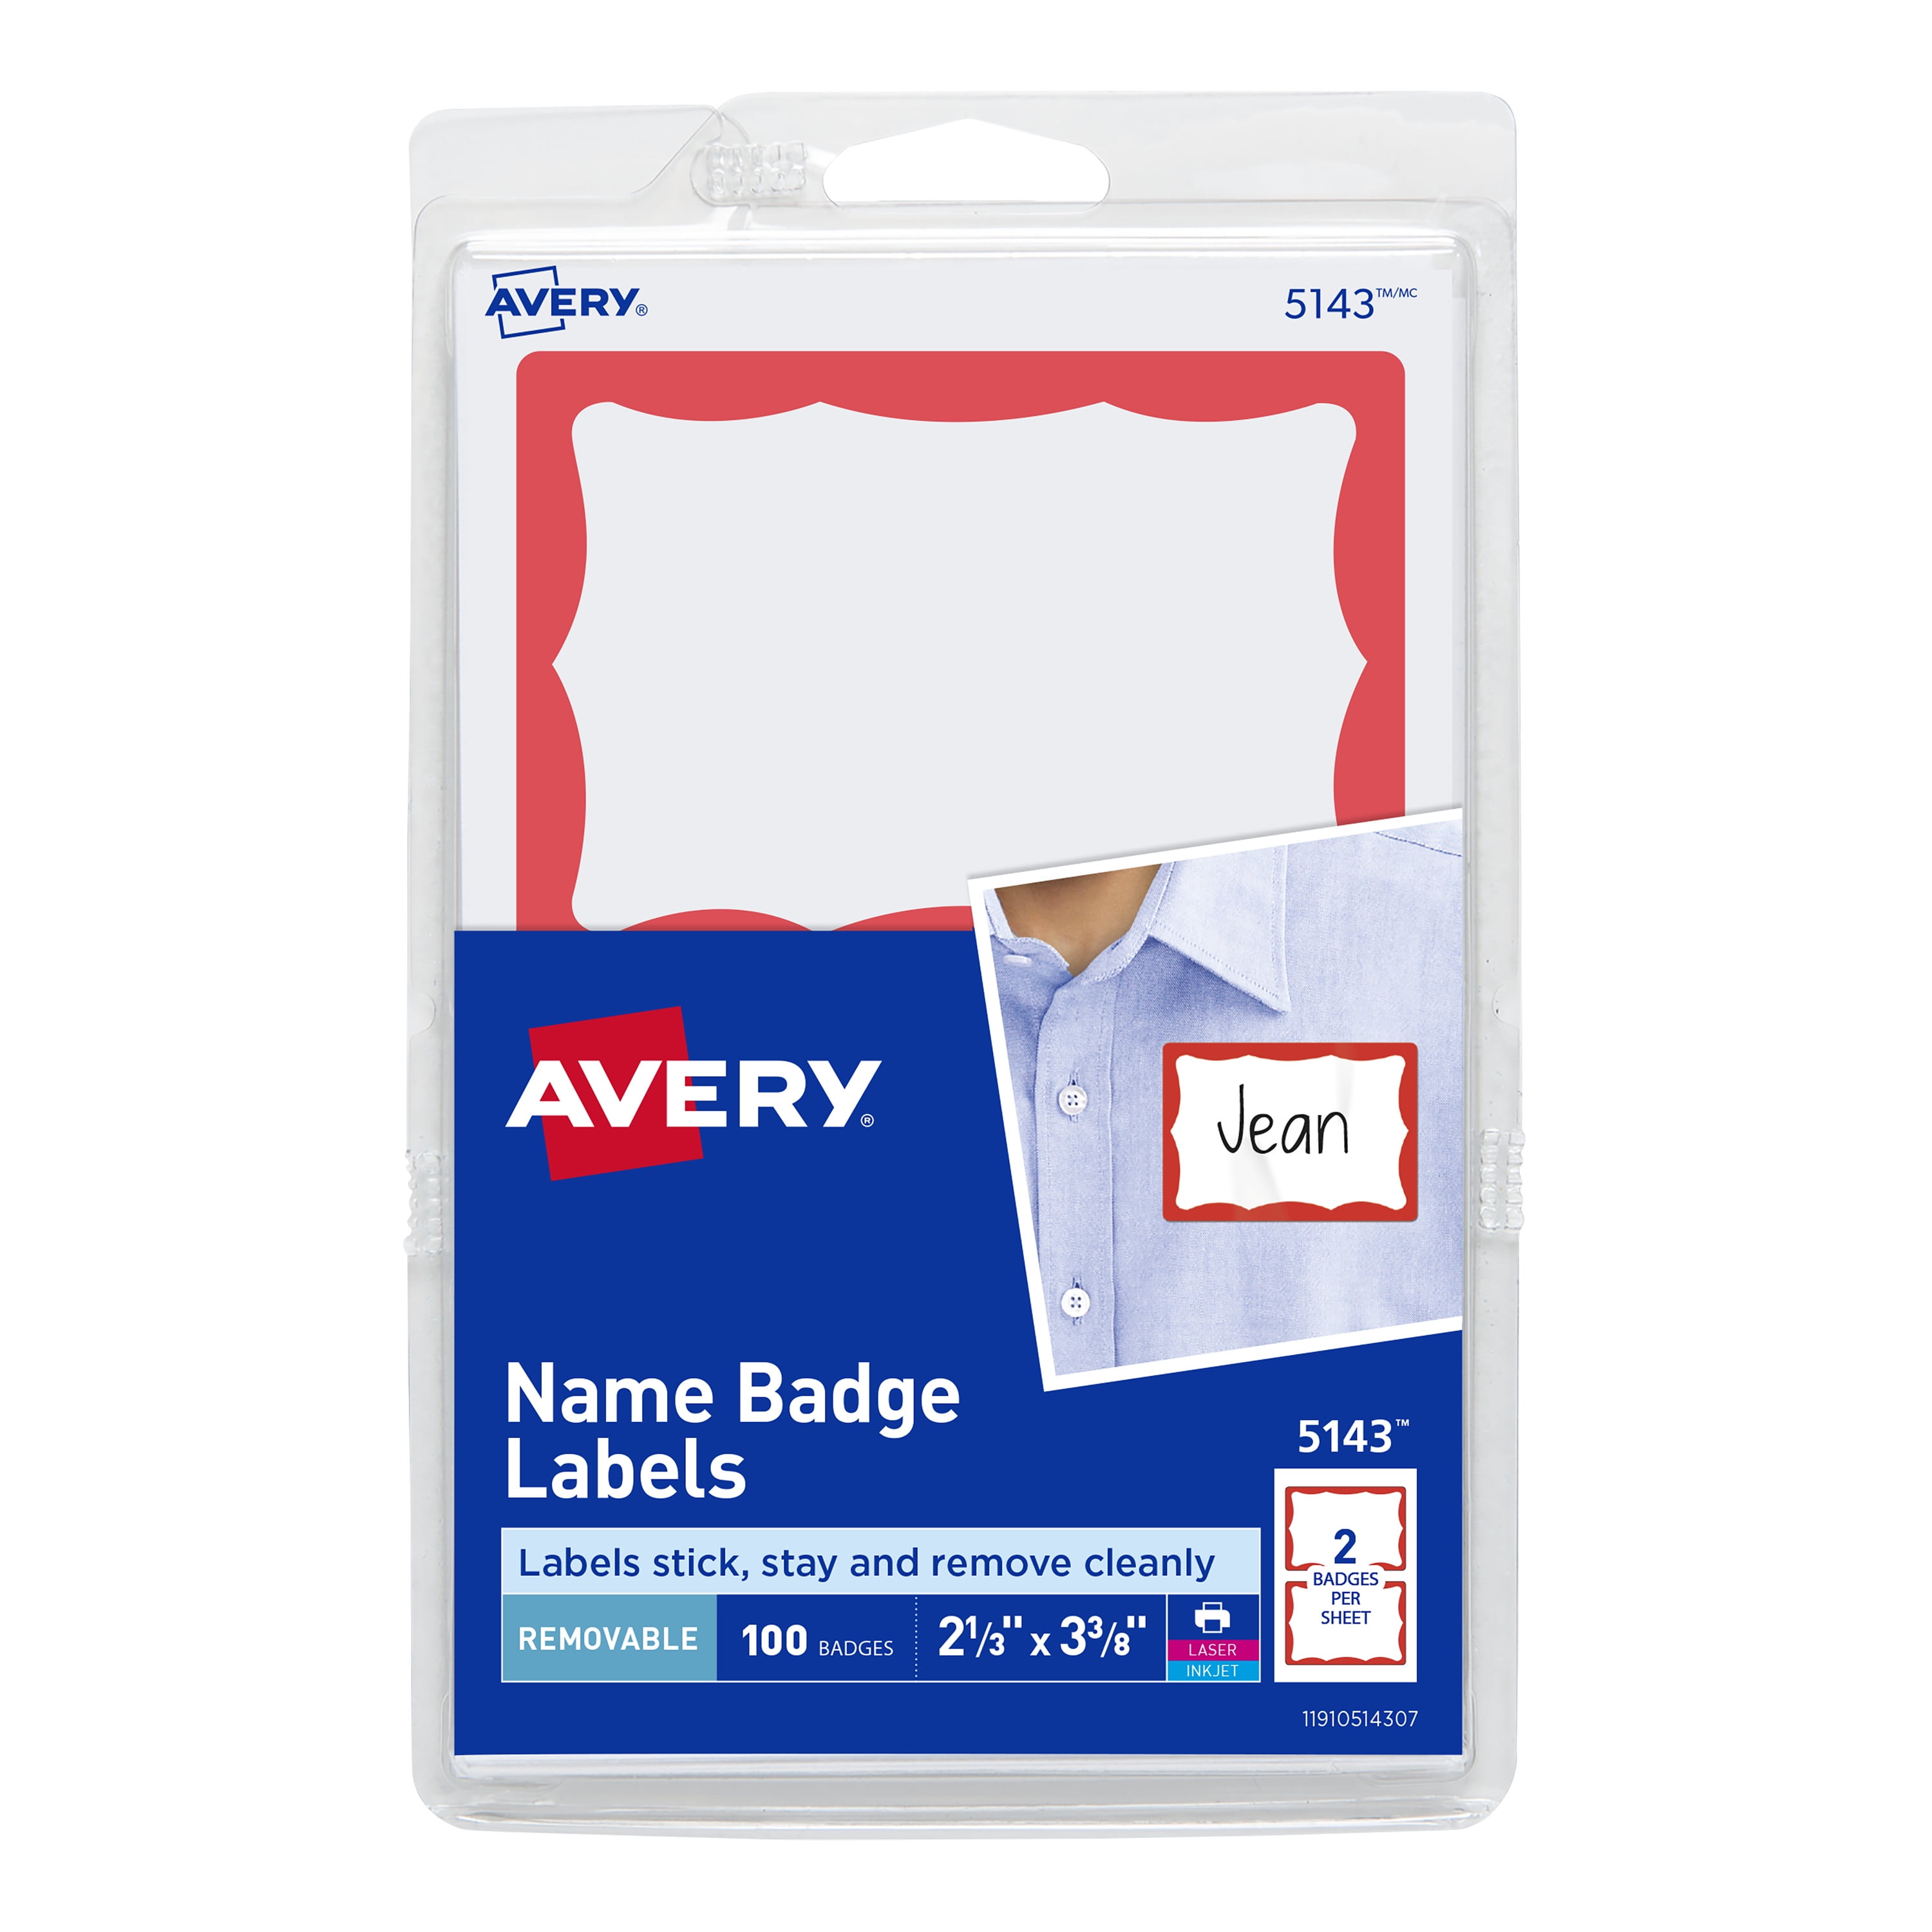 A4 Sheet of 86 x 55 mm In... Avery L7418-25 Printable Name Badge Insert Refills 